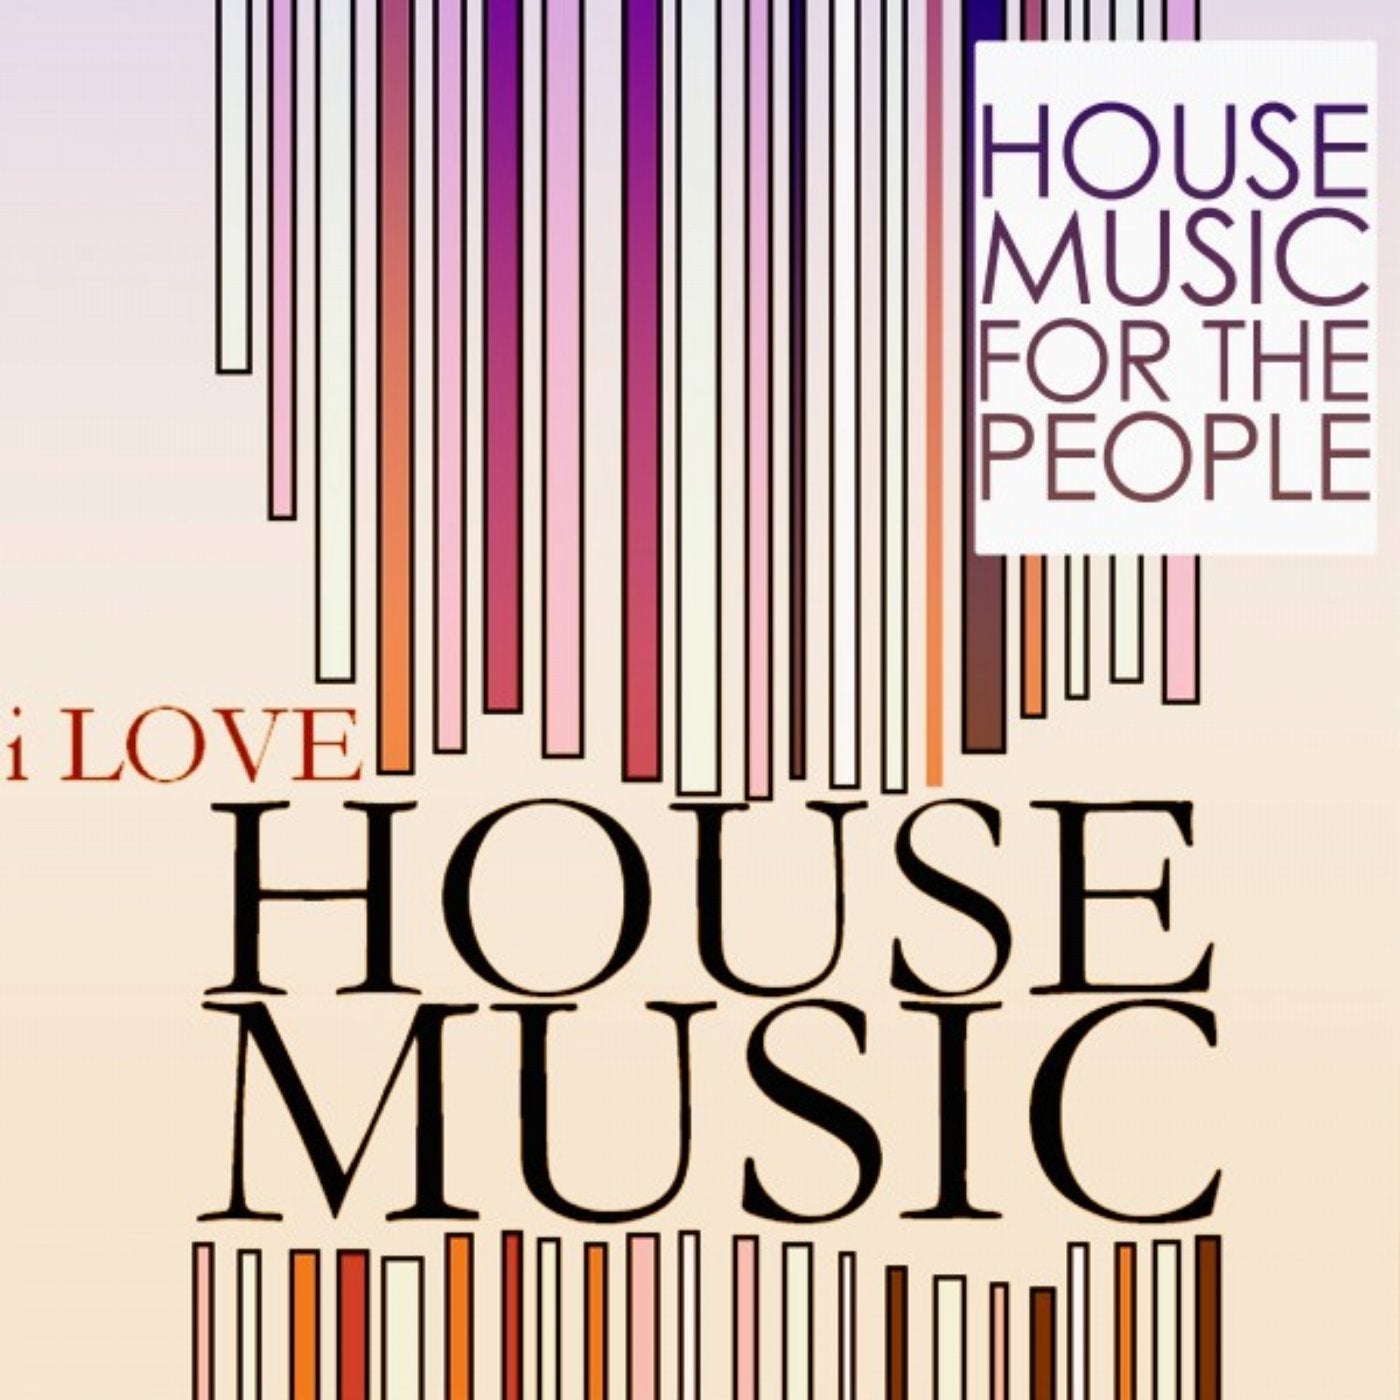 I Love House Music (House Music for the People)